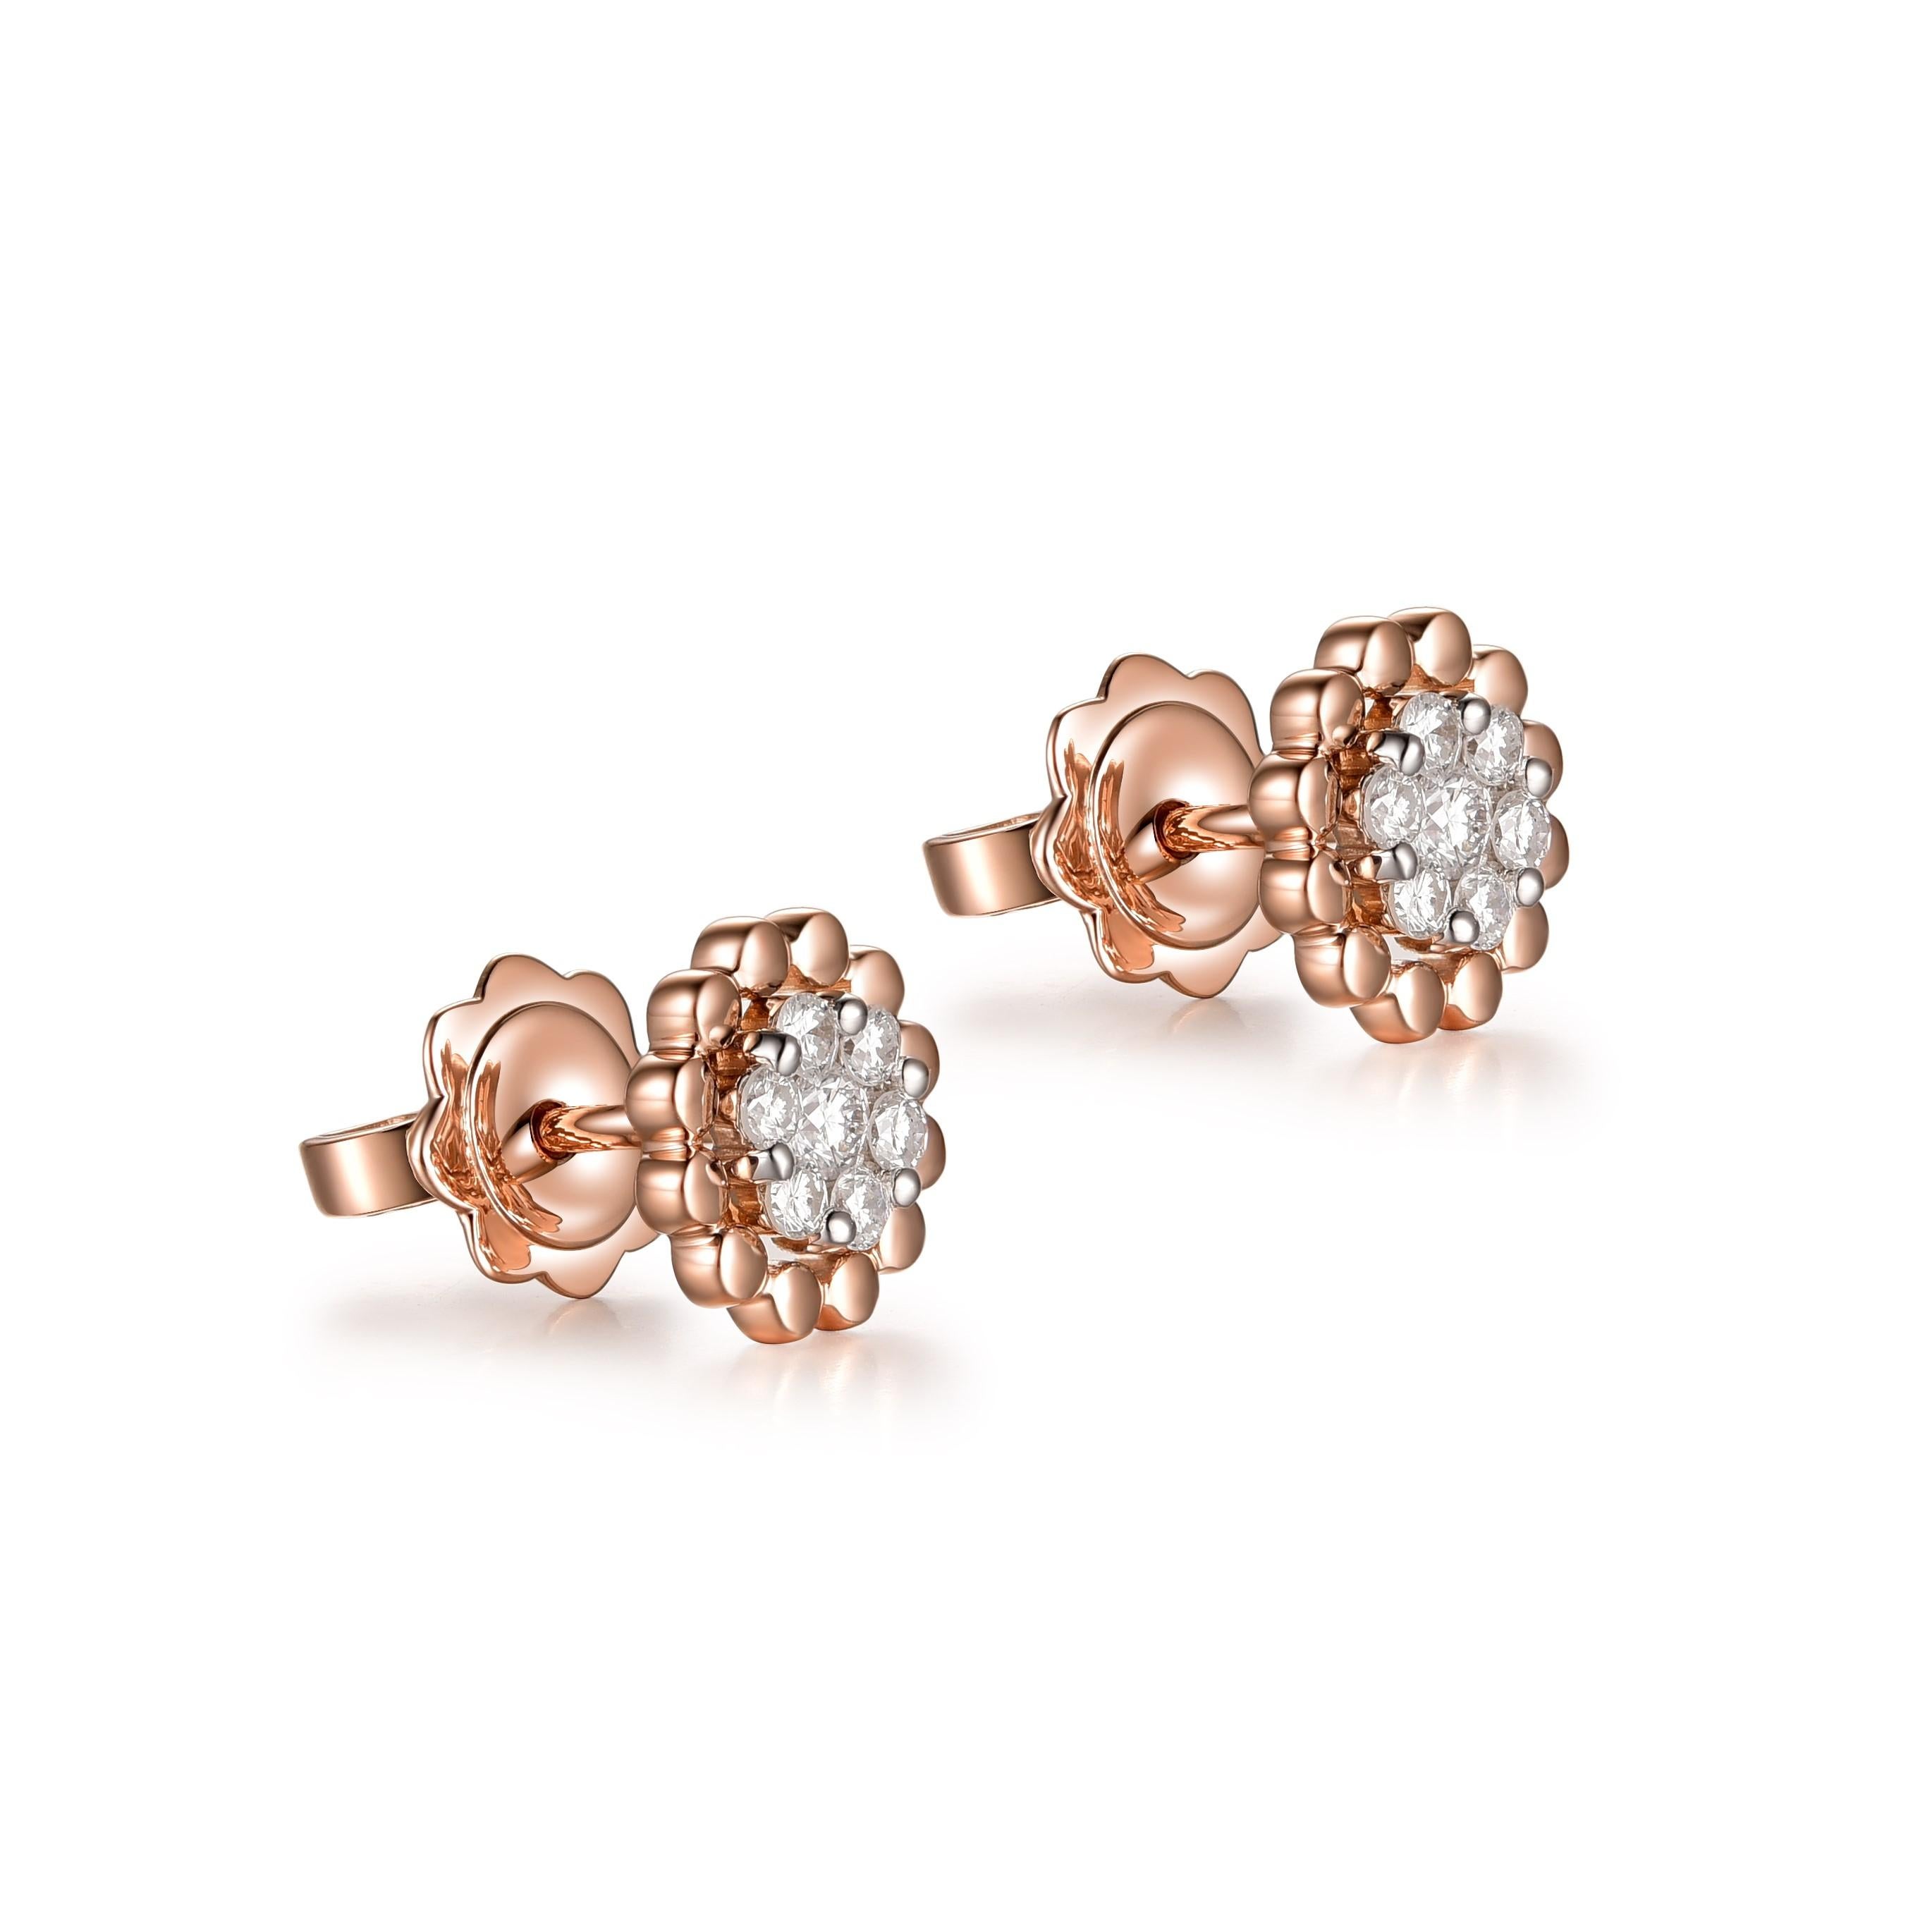 
The earrings depicted are a charming pair of 18K rose gold diamond studs, exuding contemporary elegance and classic charm. Each earring features a cluster of round brilliant-cut diamonds, meticulously arranged to form a dazzling centerpiece with a